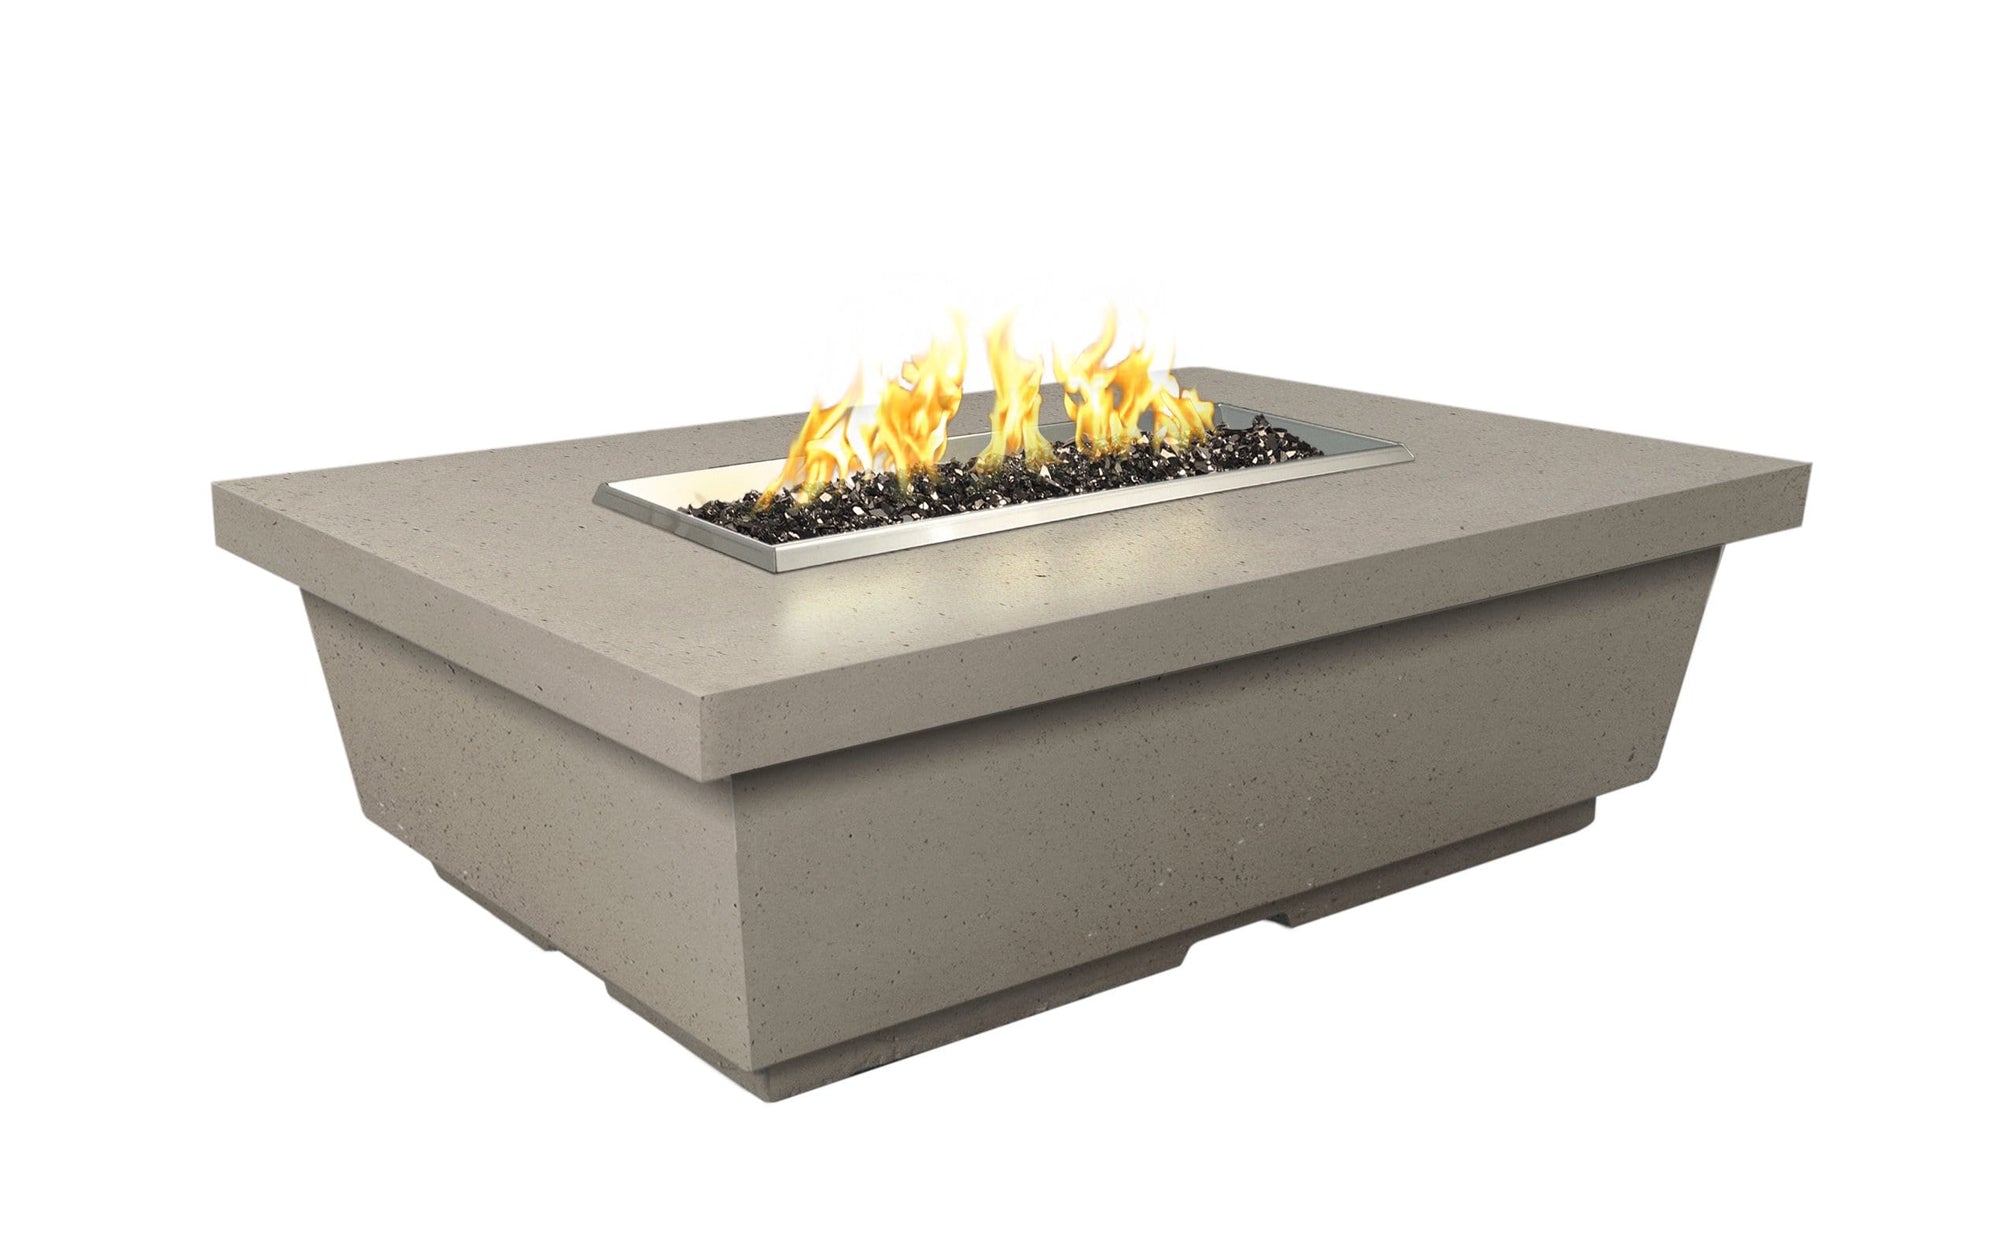 American Fyre Designs Fire Features American Fyre Designs 52" Contempo Rectangle Gas Firetable / 783-xx-11-M4NC, 783-xx-11-M4PC, 783-xx-11-F4NC, or 783-xx-11-F4PC